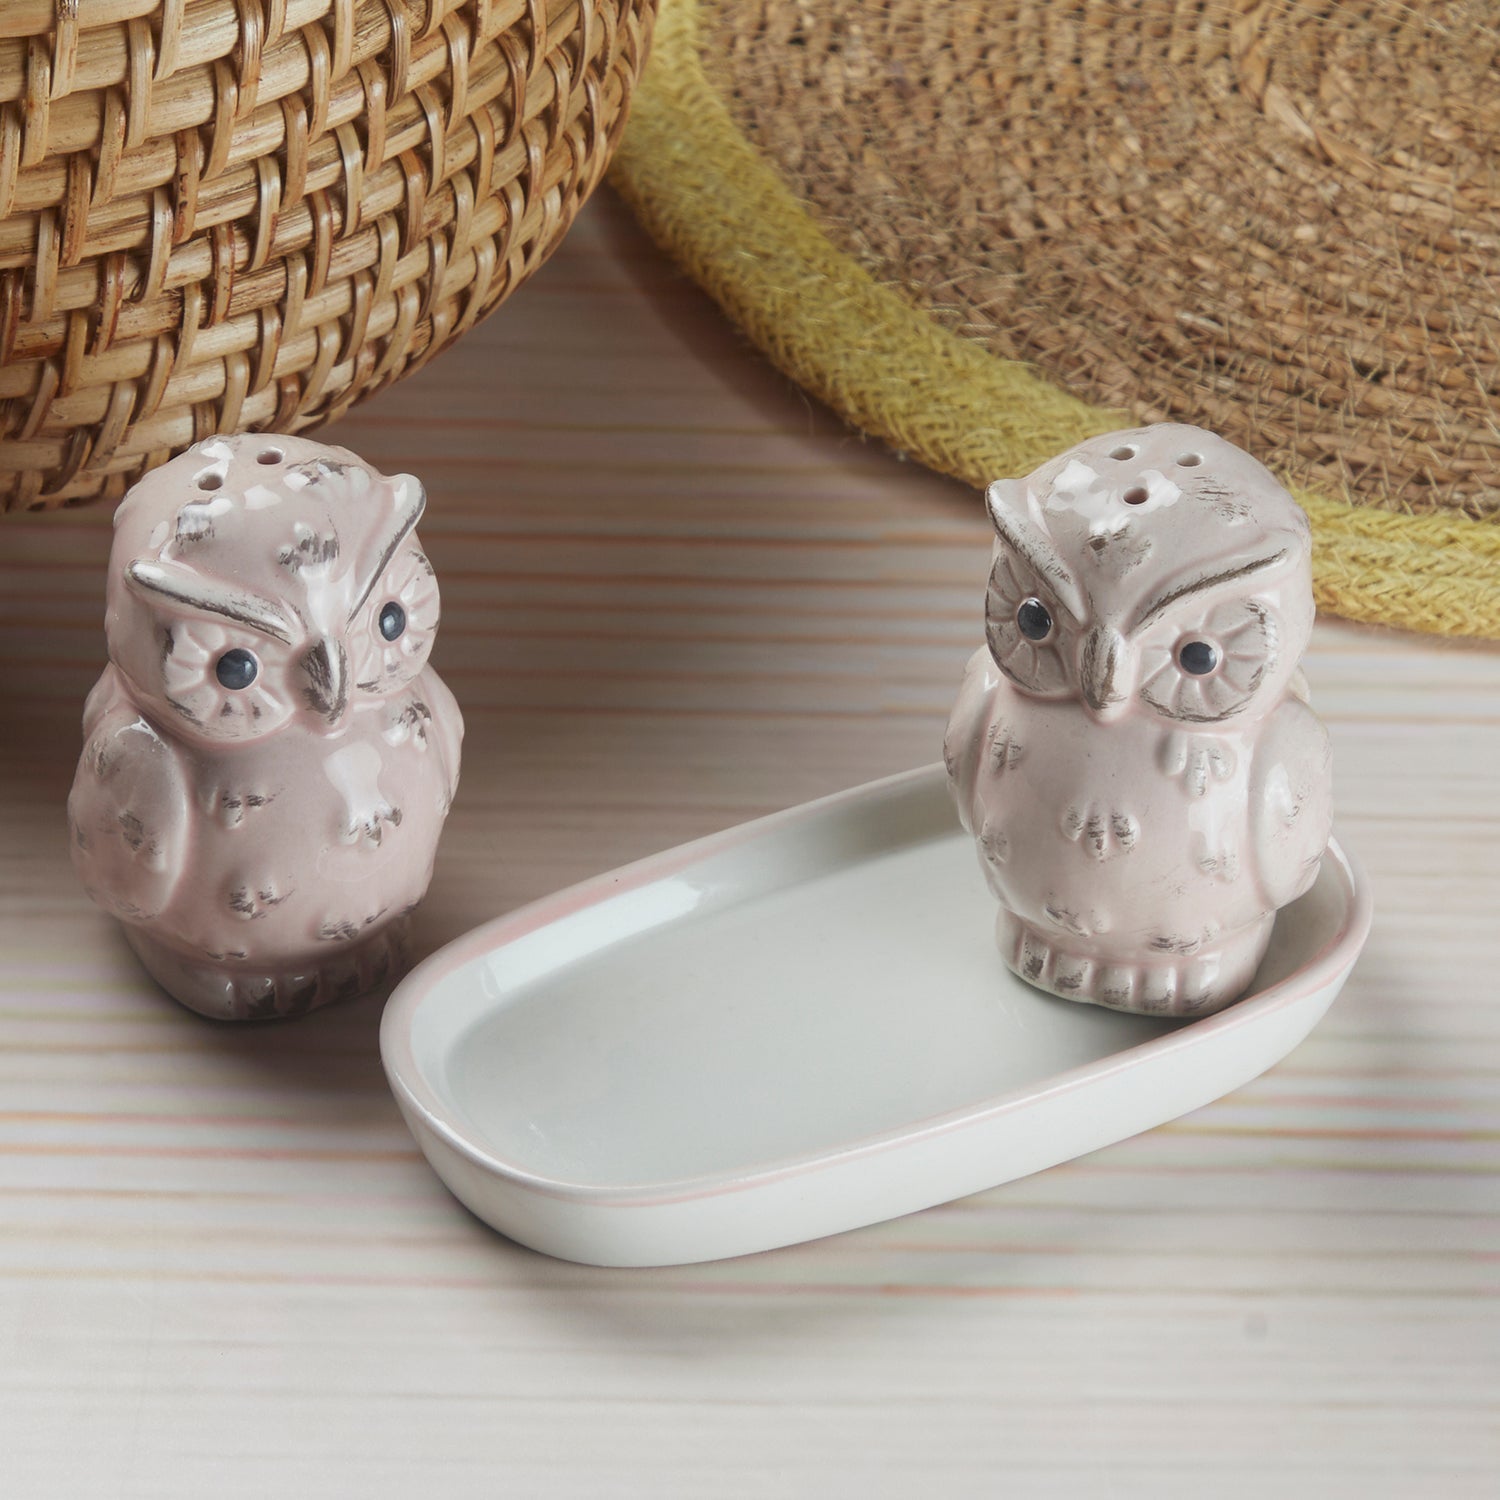 Kookee Ceramic Salt and Pepper Shakers Set with tray for Dining Table used as Namak Dhani, Shaker, Sprinkler, Spices Dispenser for Home, Kitchen and Restaurant, Owl Design, Pink